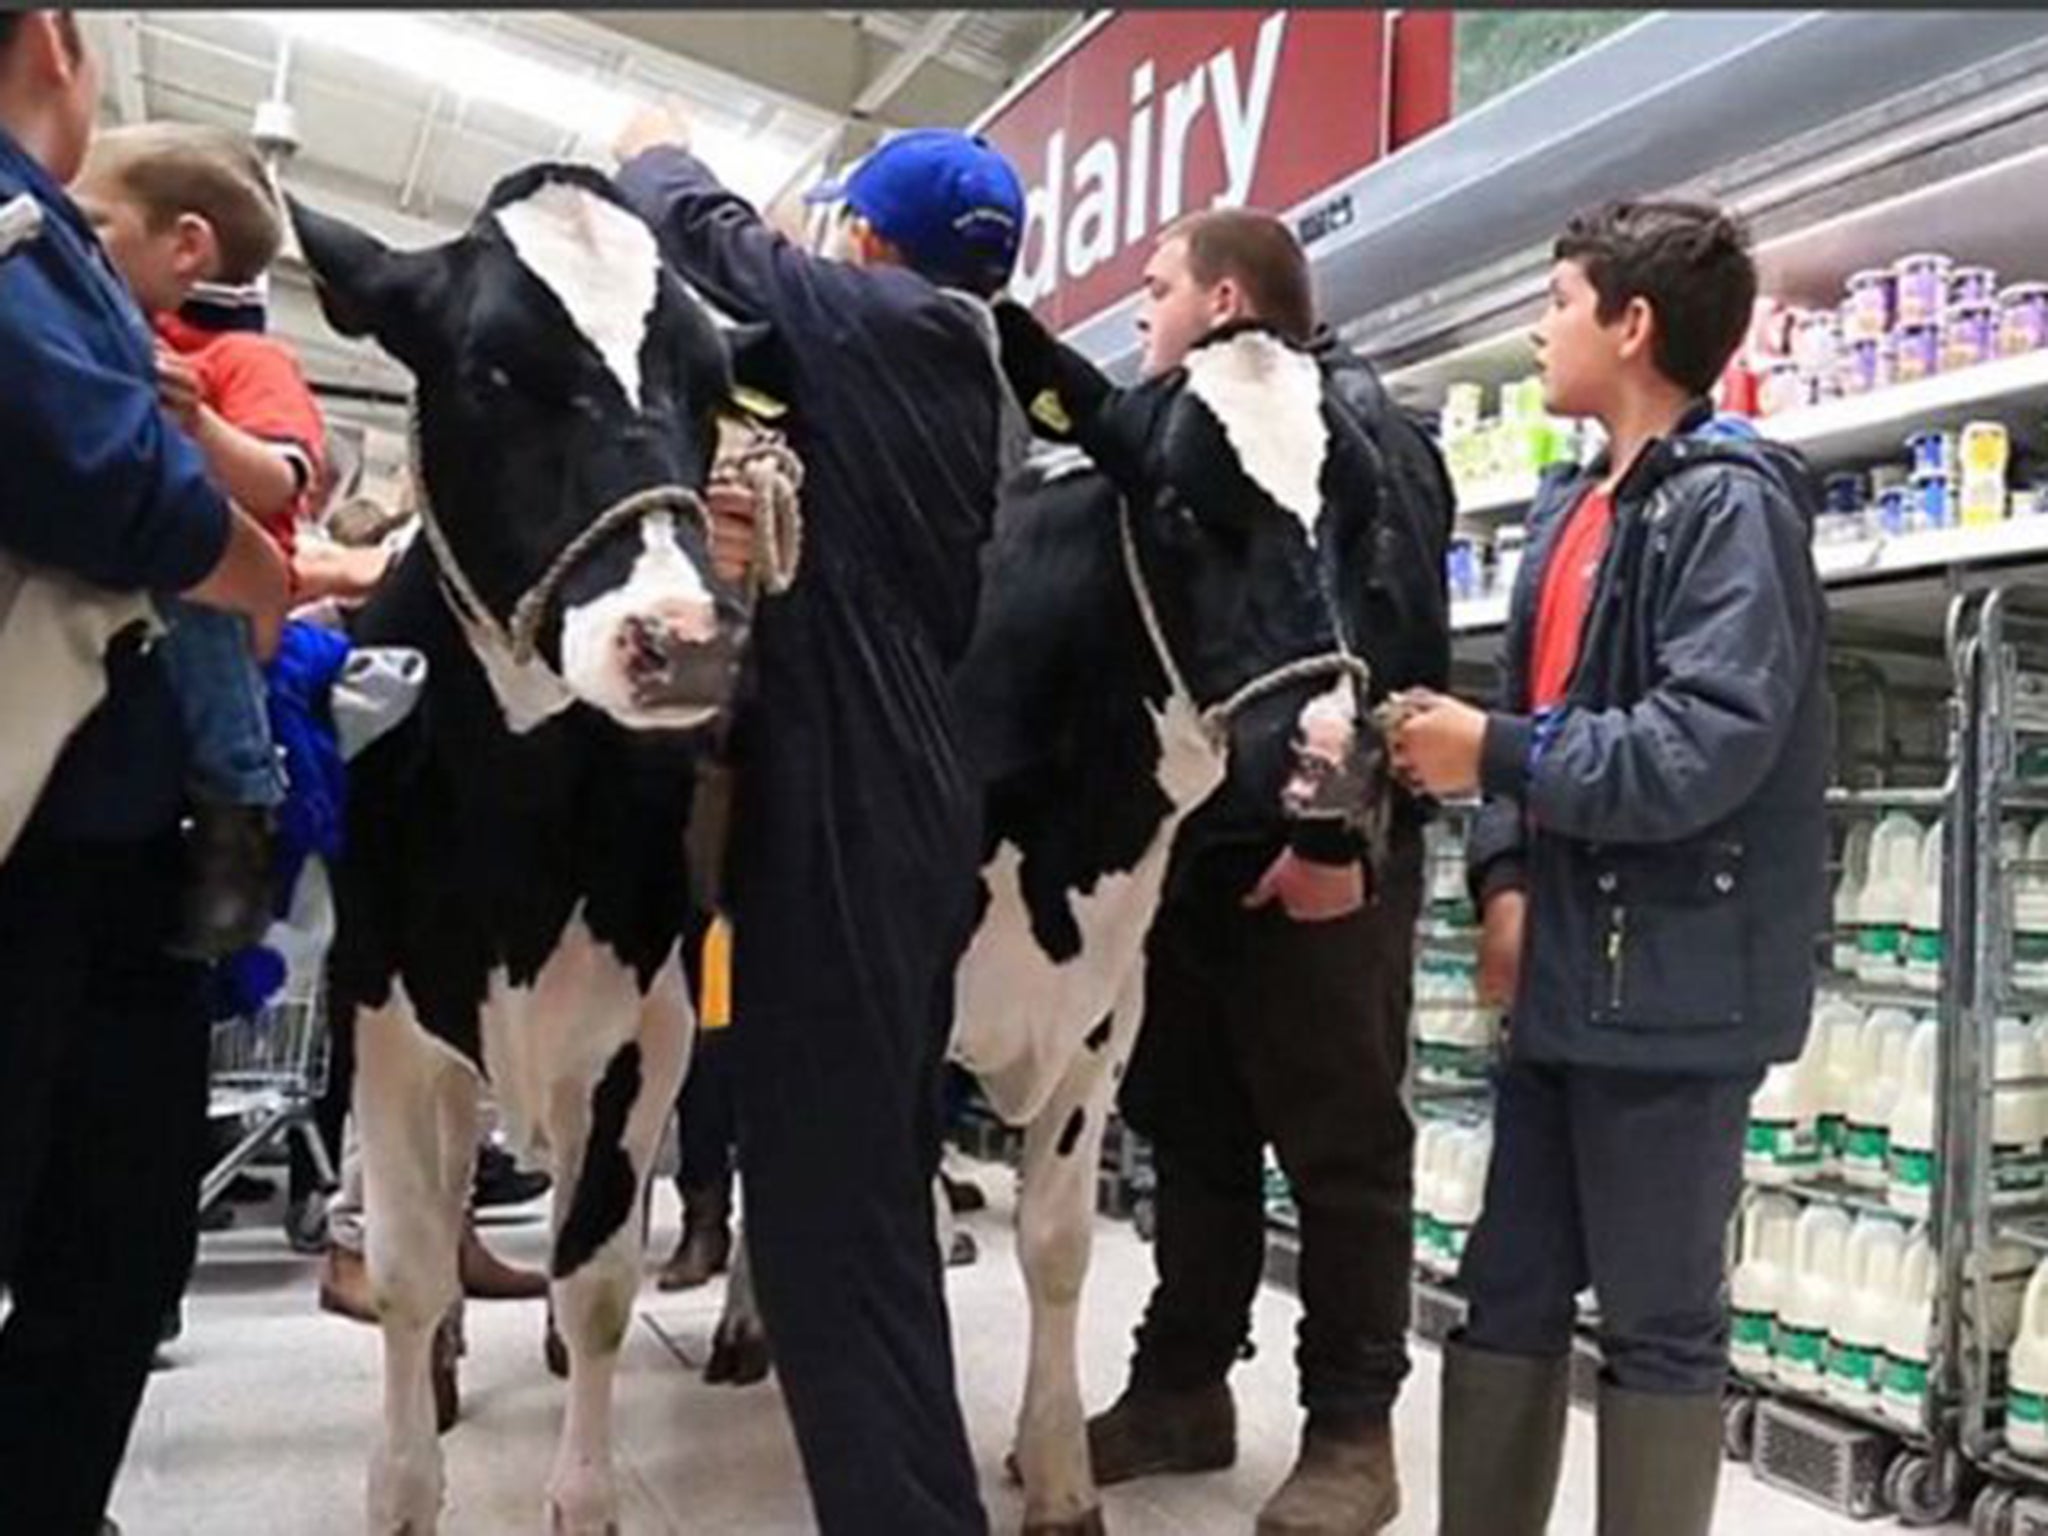 Dairy farmers put supermarkets on the defensive. Morrison’s reacted with Milk for Farmers, which cost more than its ordinary milk